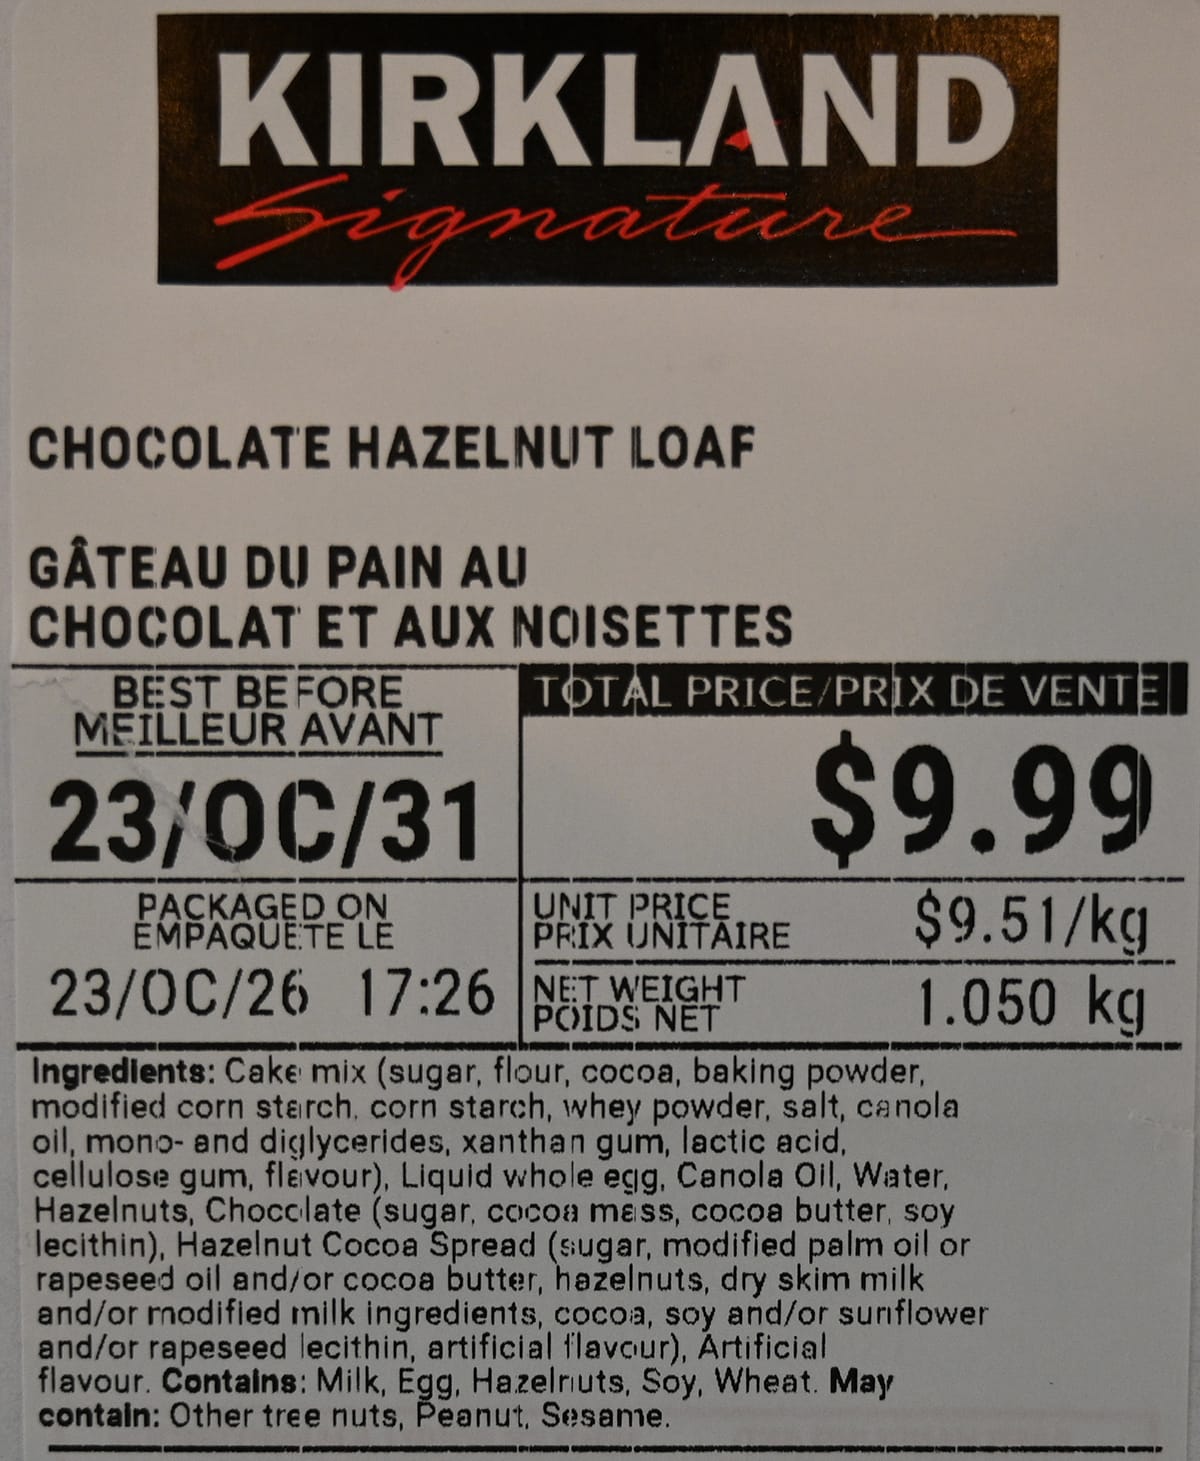 Closeup image of the front label of the loaf showing ingredients, best before date and cost.